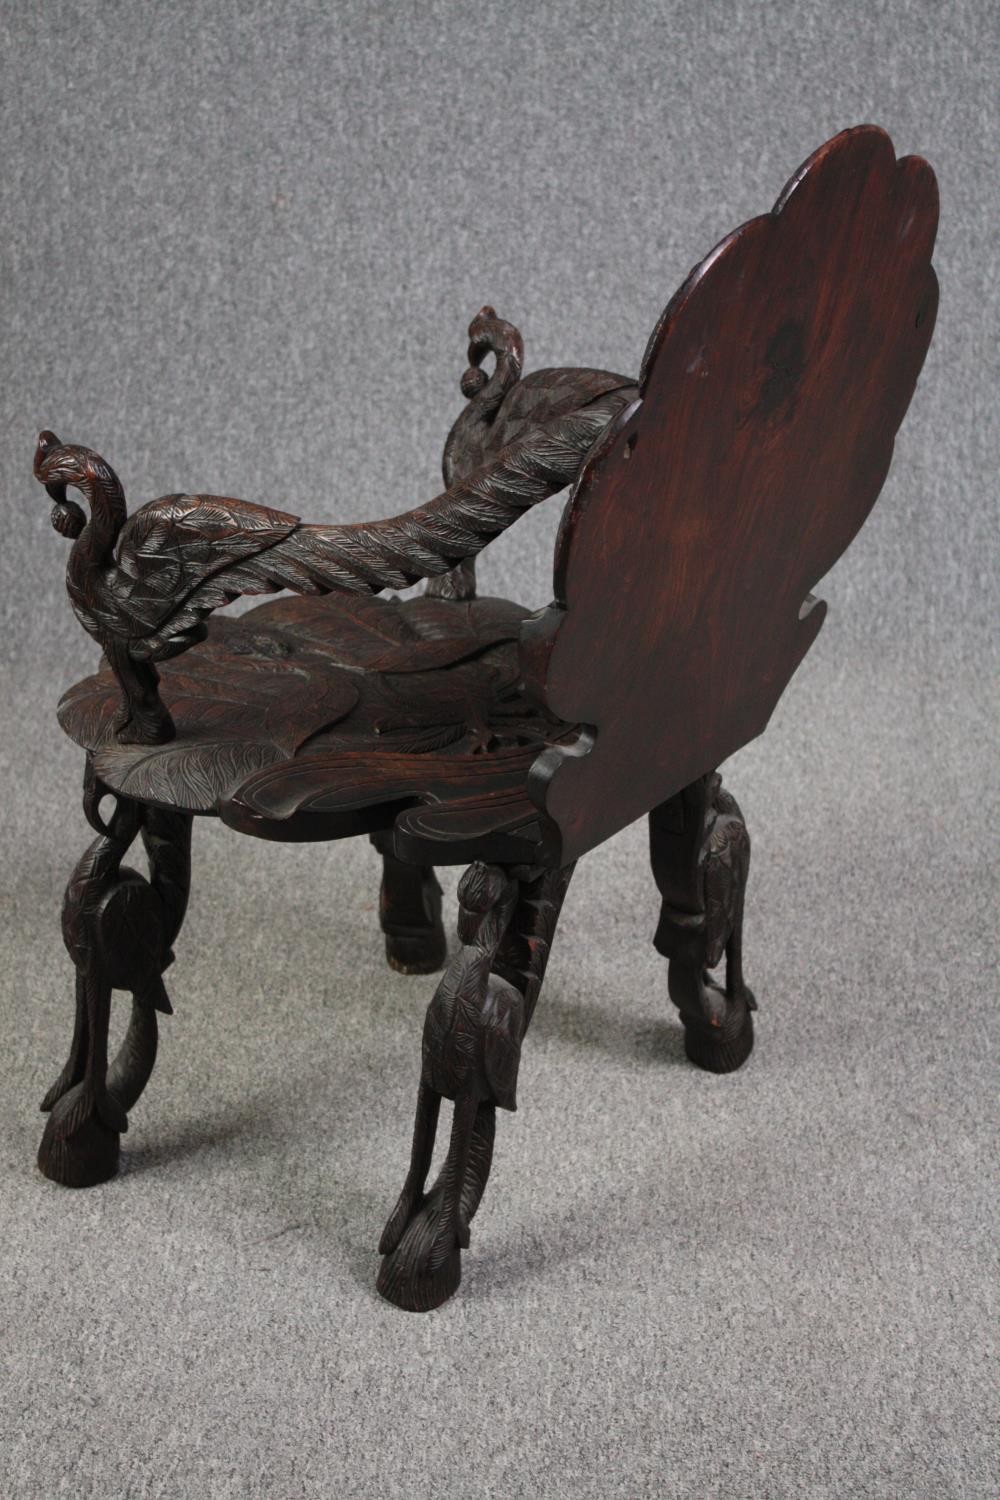 Grotto chair, 19th century Venetian style with allover bird and foliate carving. H.87cm. - Image 6 of 11